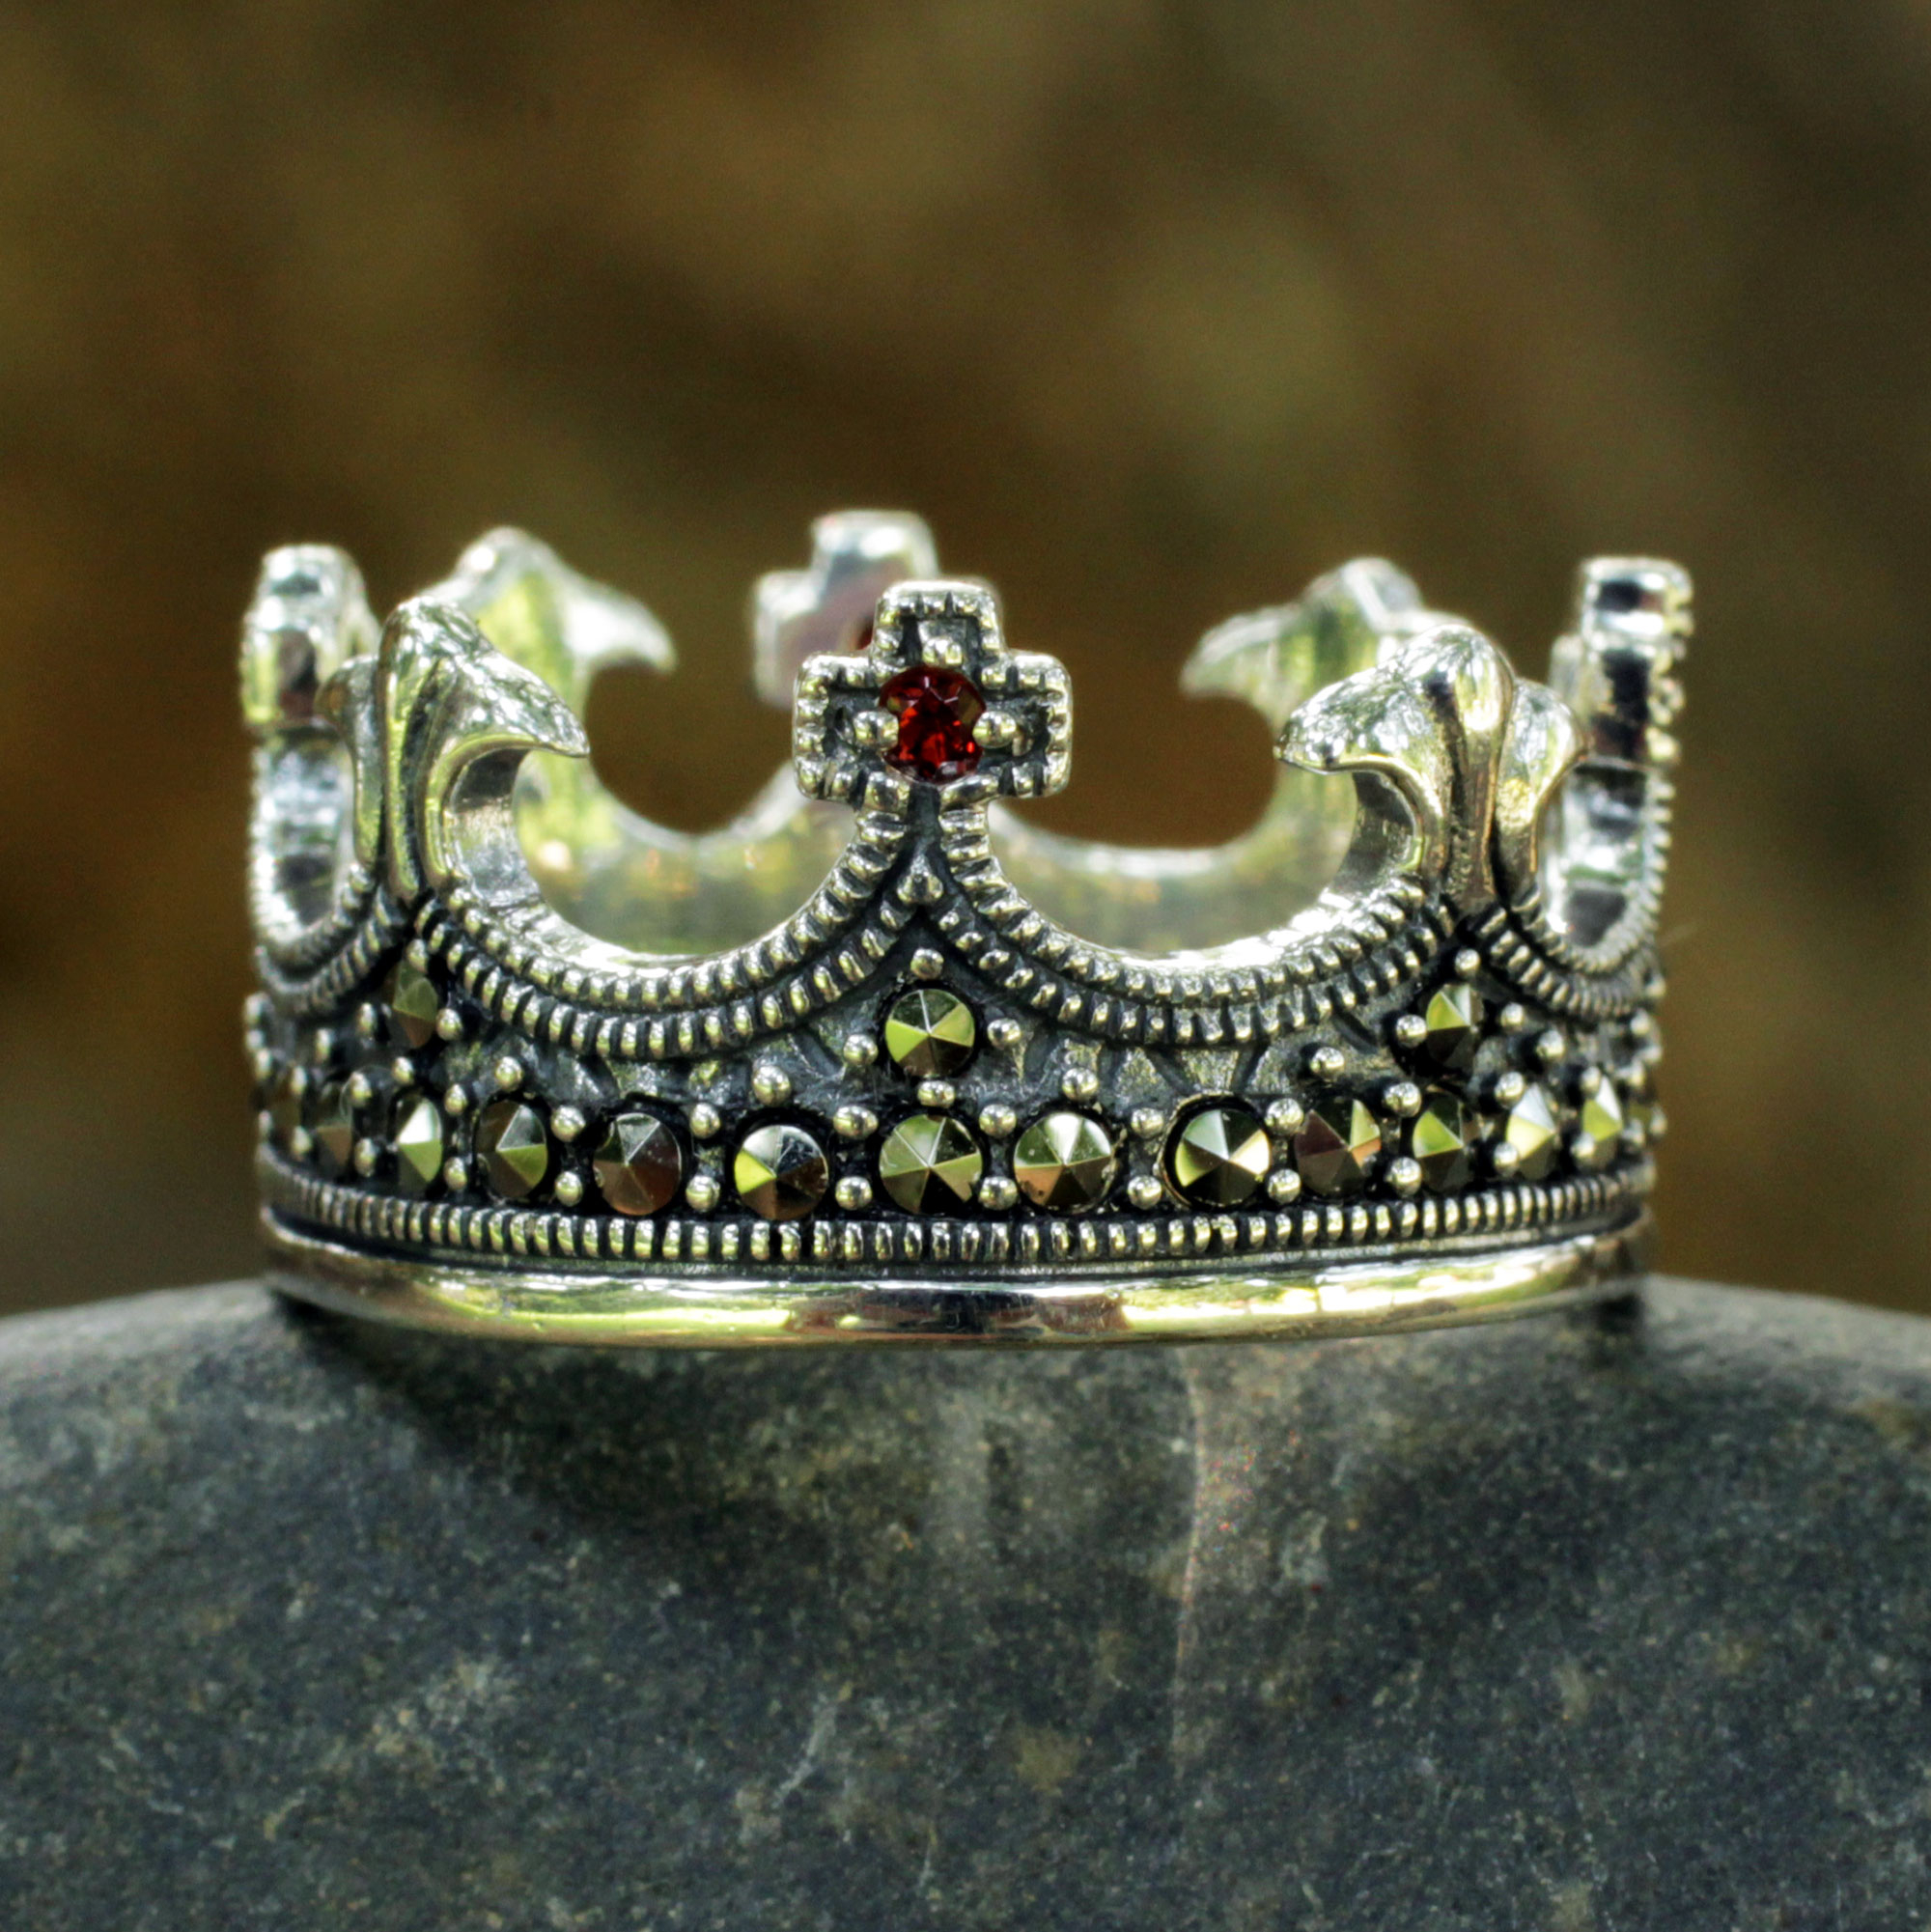 Qoo10 - Queen Crown Ring : Jewelry/Watches